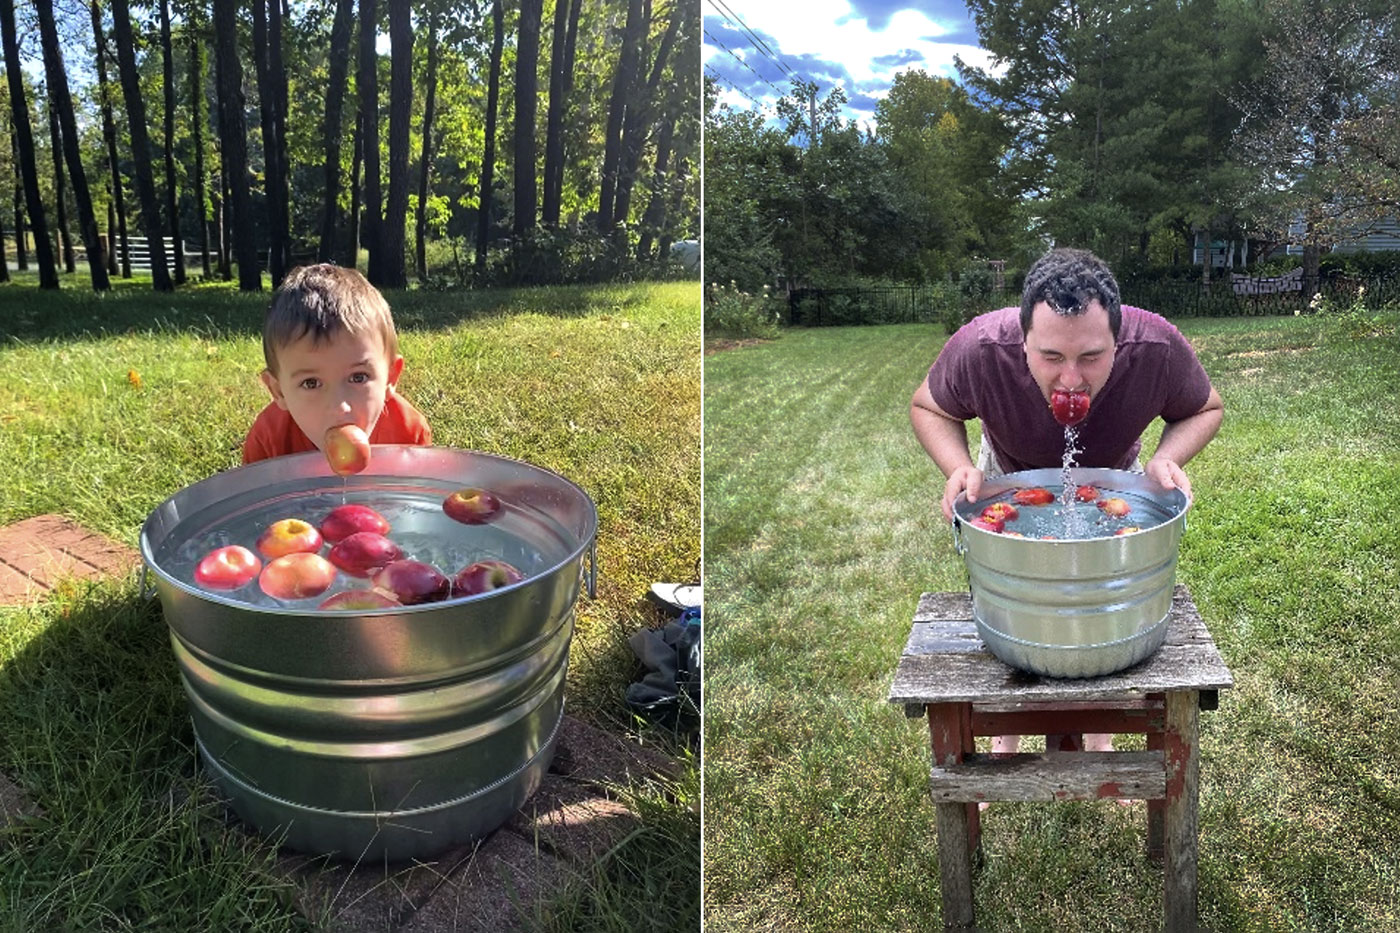 child on left and adult on right bobbing for apples in metal tub